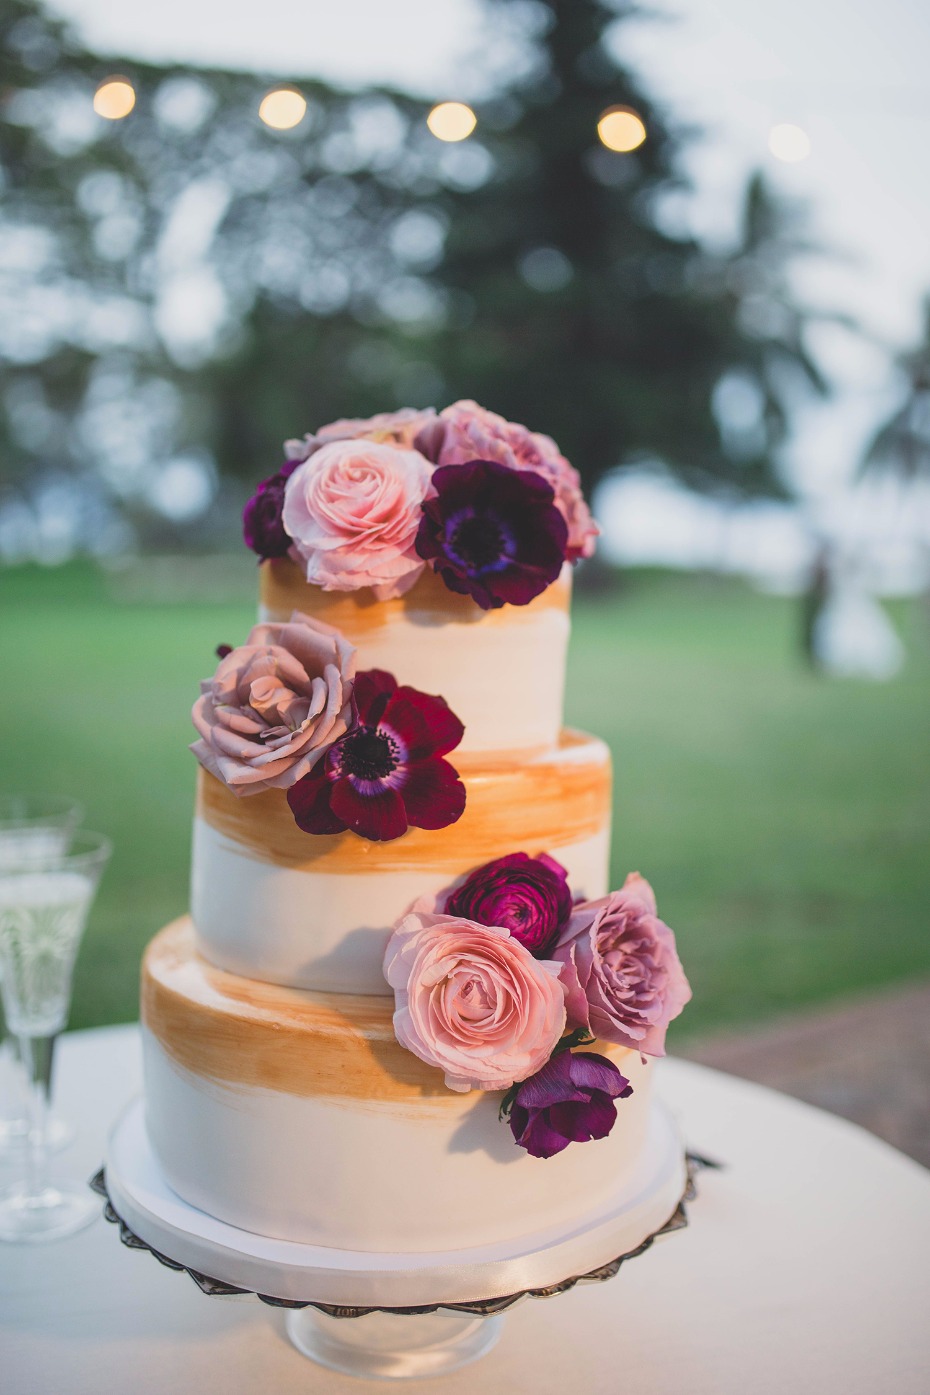 Berry toned floral wedding cake